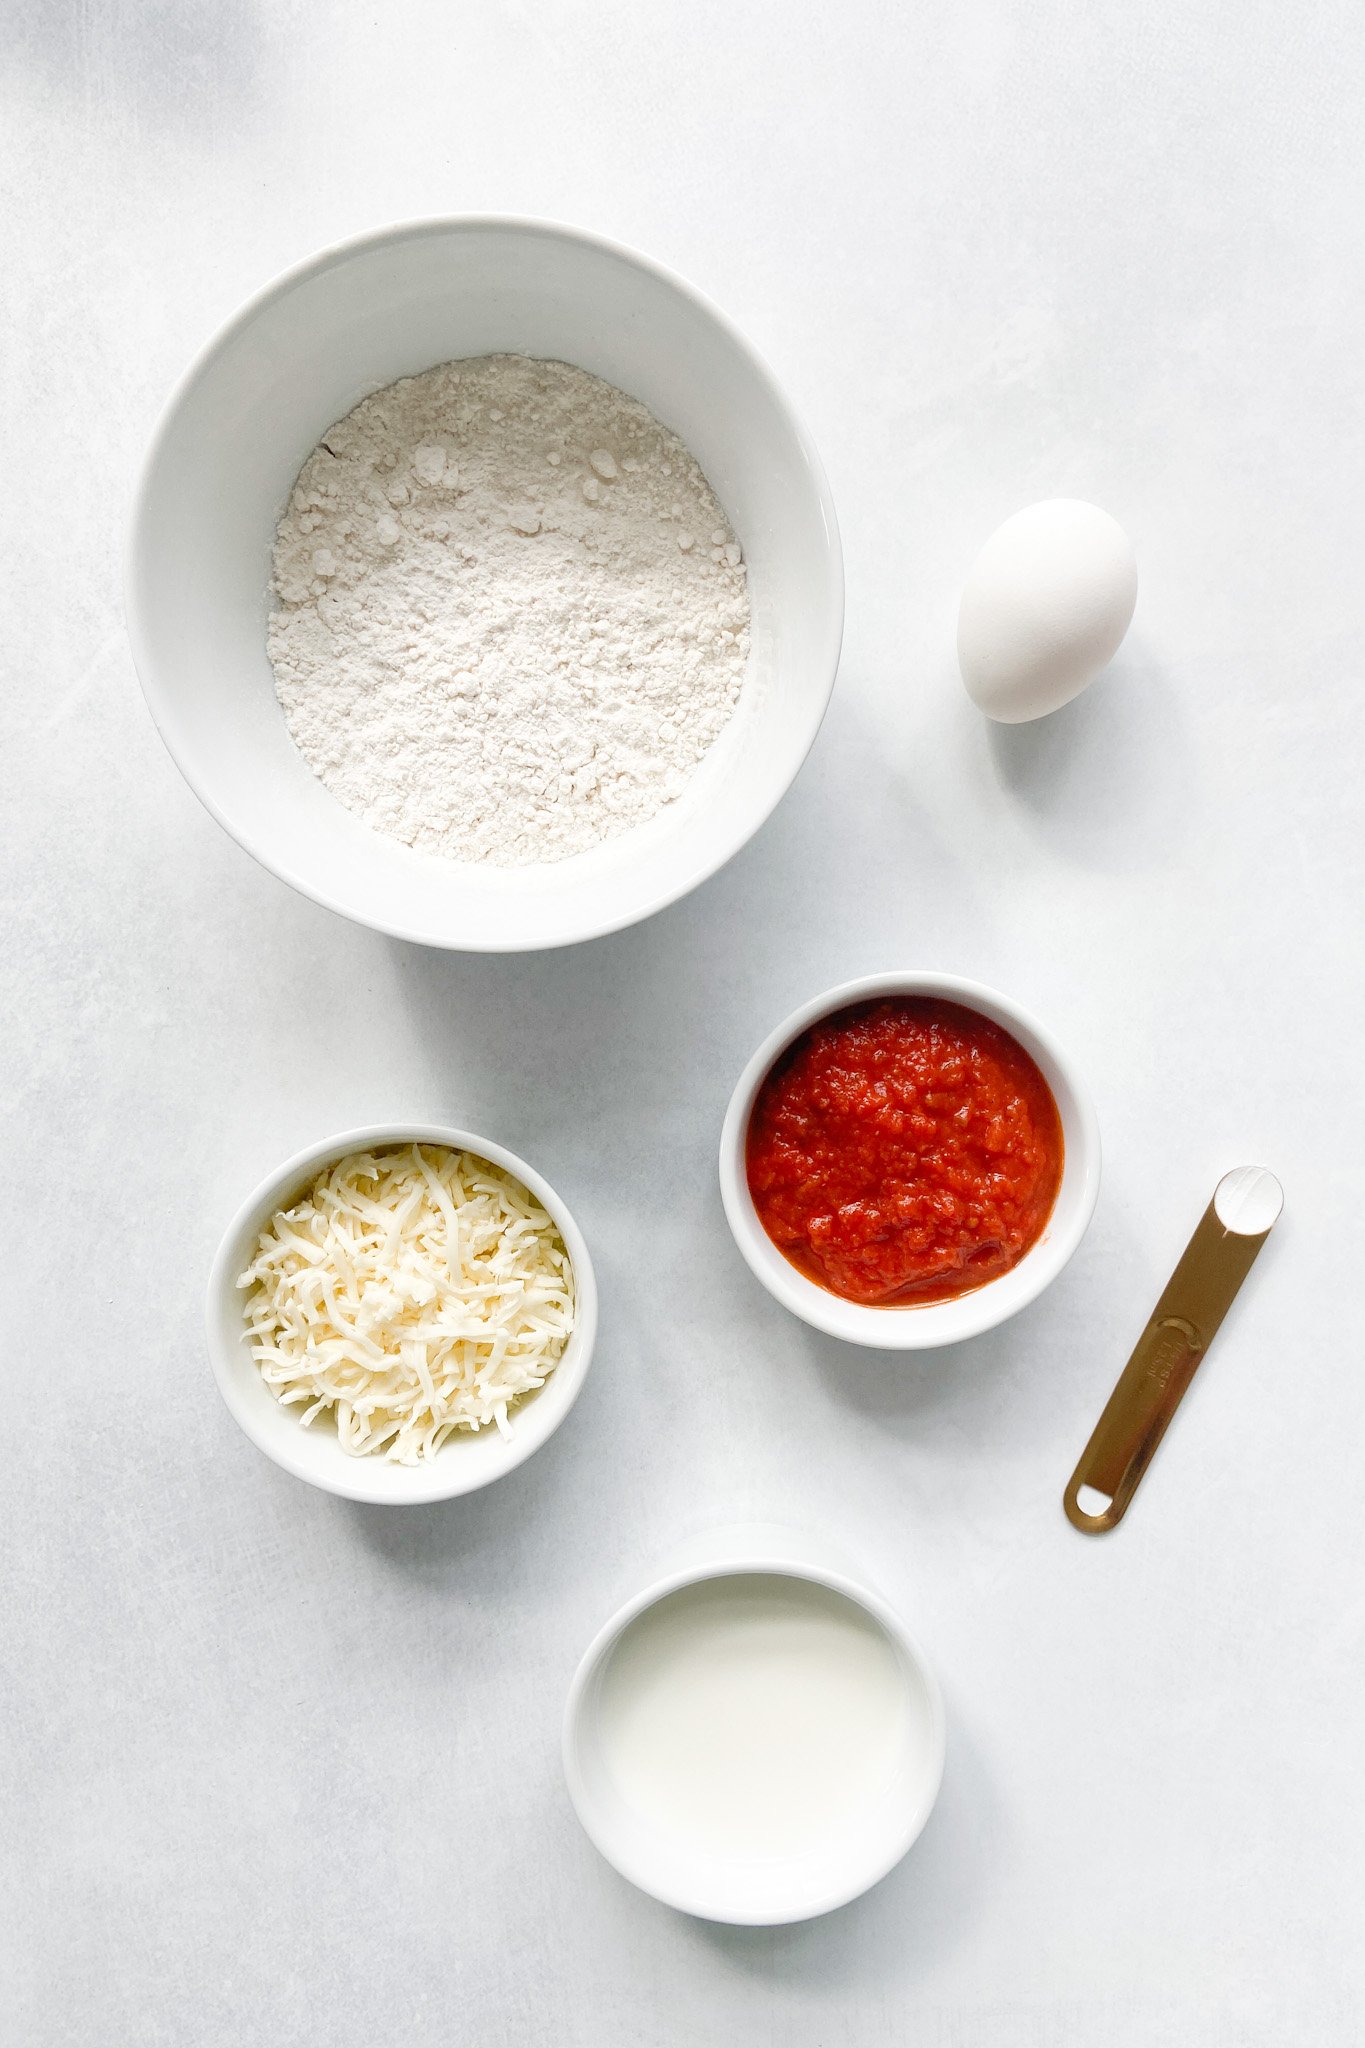 Ingredients to make pizza waffles. See recipe card for detailed ingredient quantities.